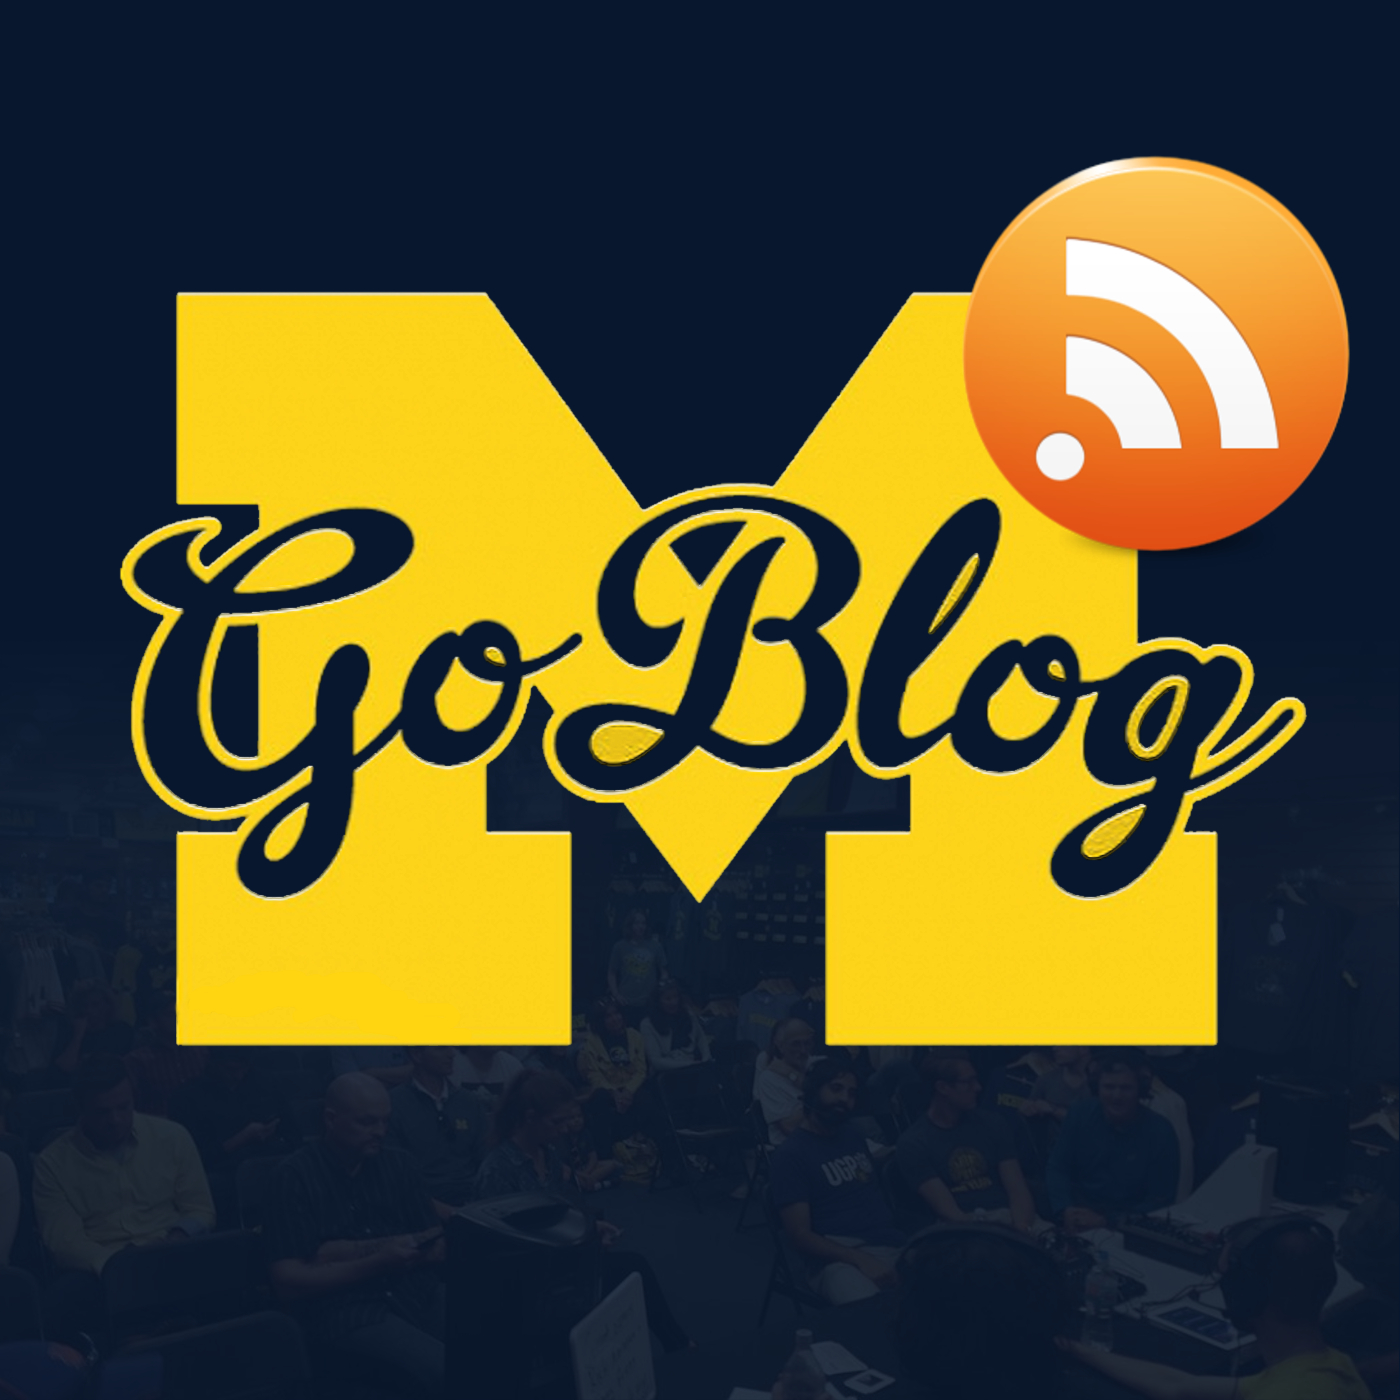 MGoBlog: The MGoPodcast